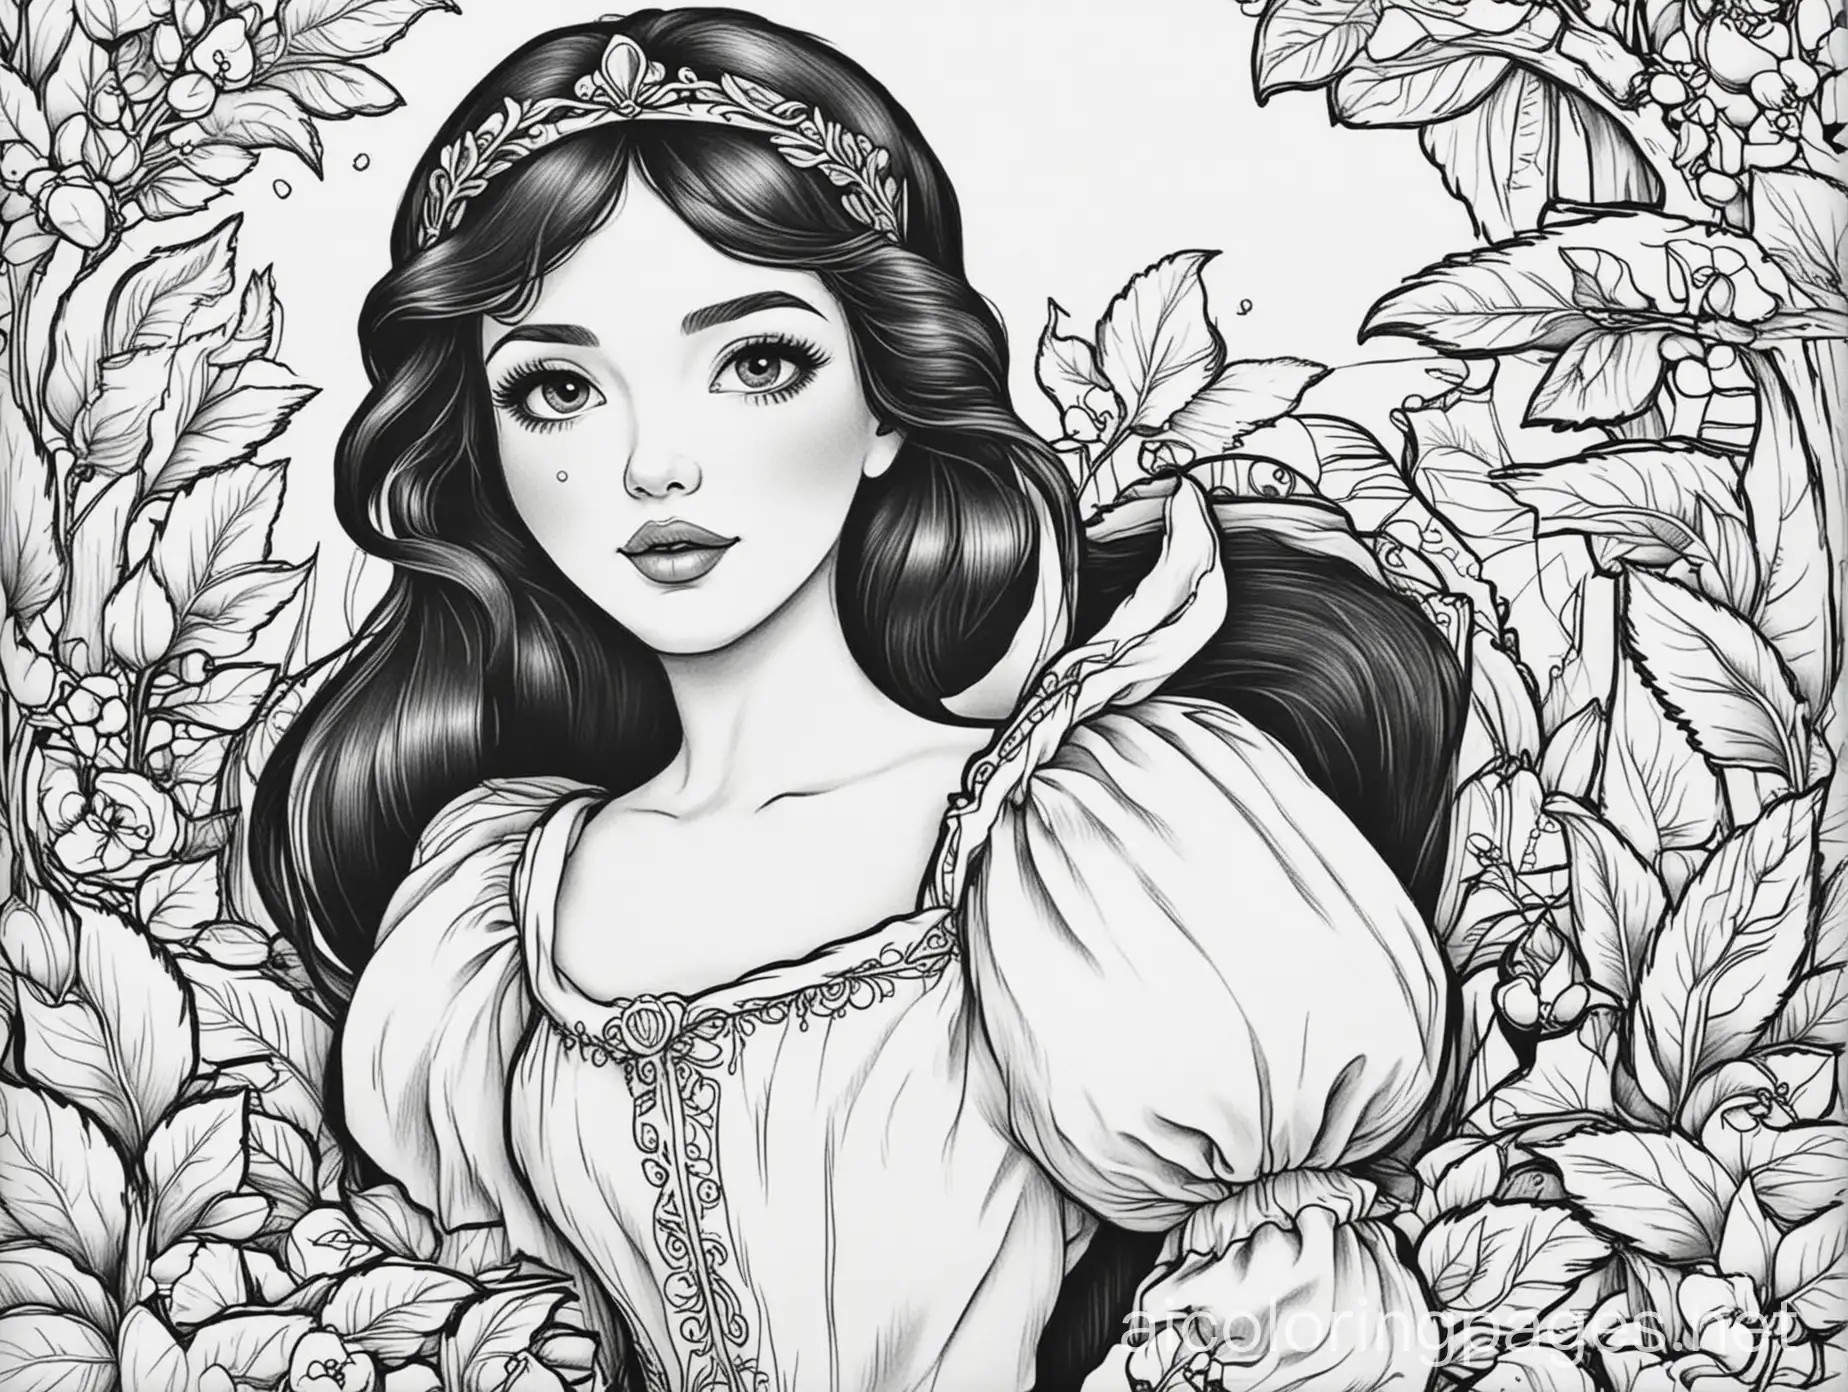 Snow white coloring 50 pages, Coloring Page, black and white, line art, white background, Simplicity, Ample White Space